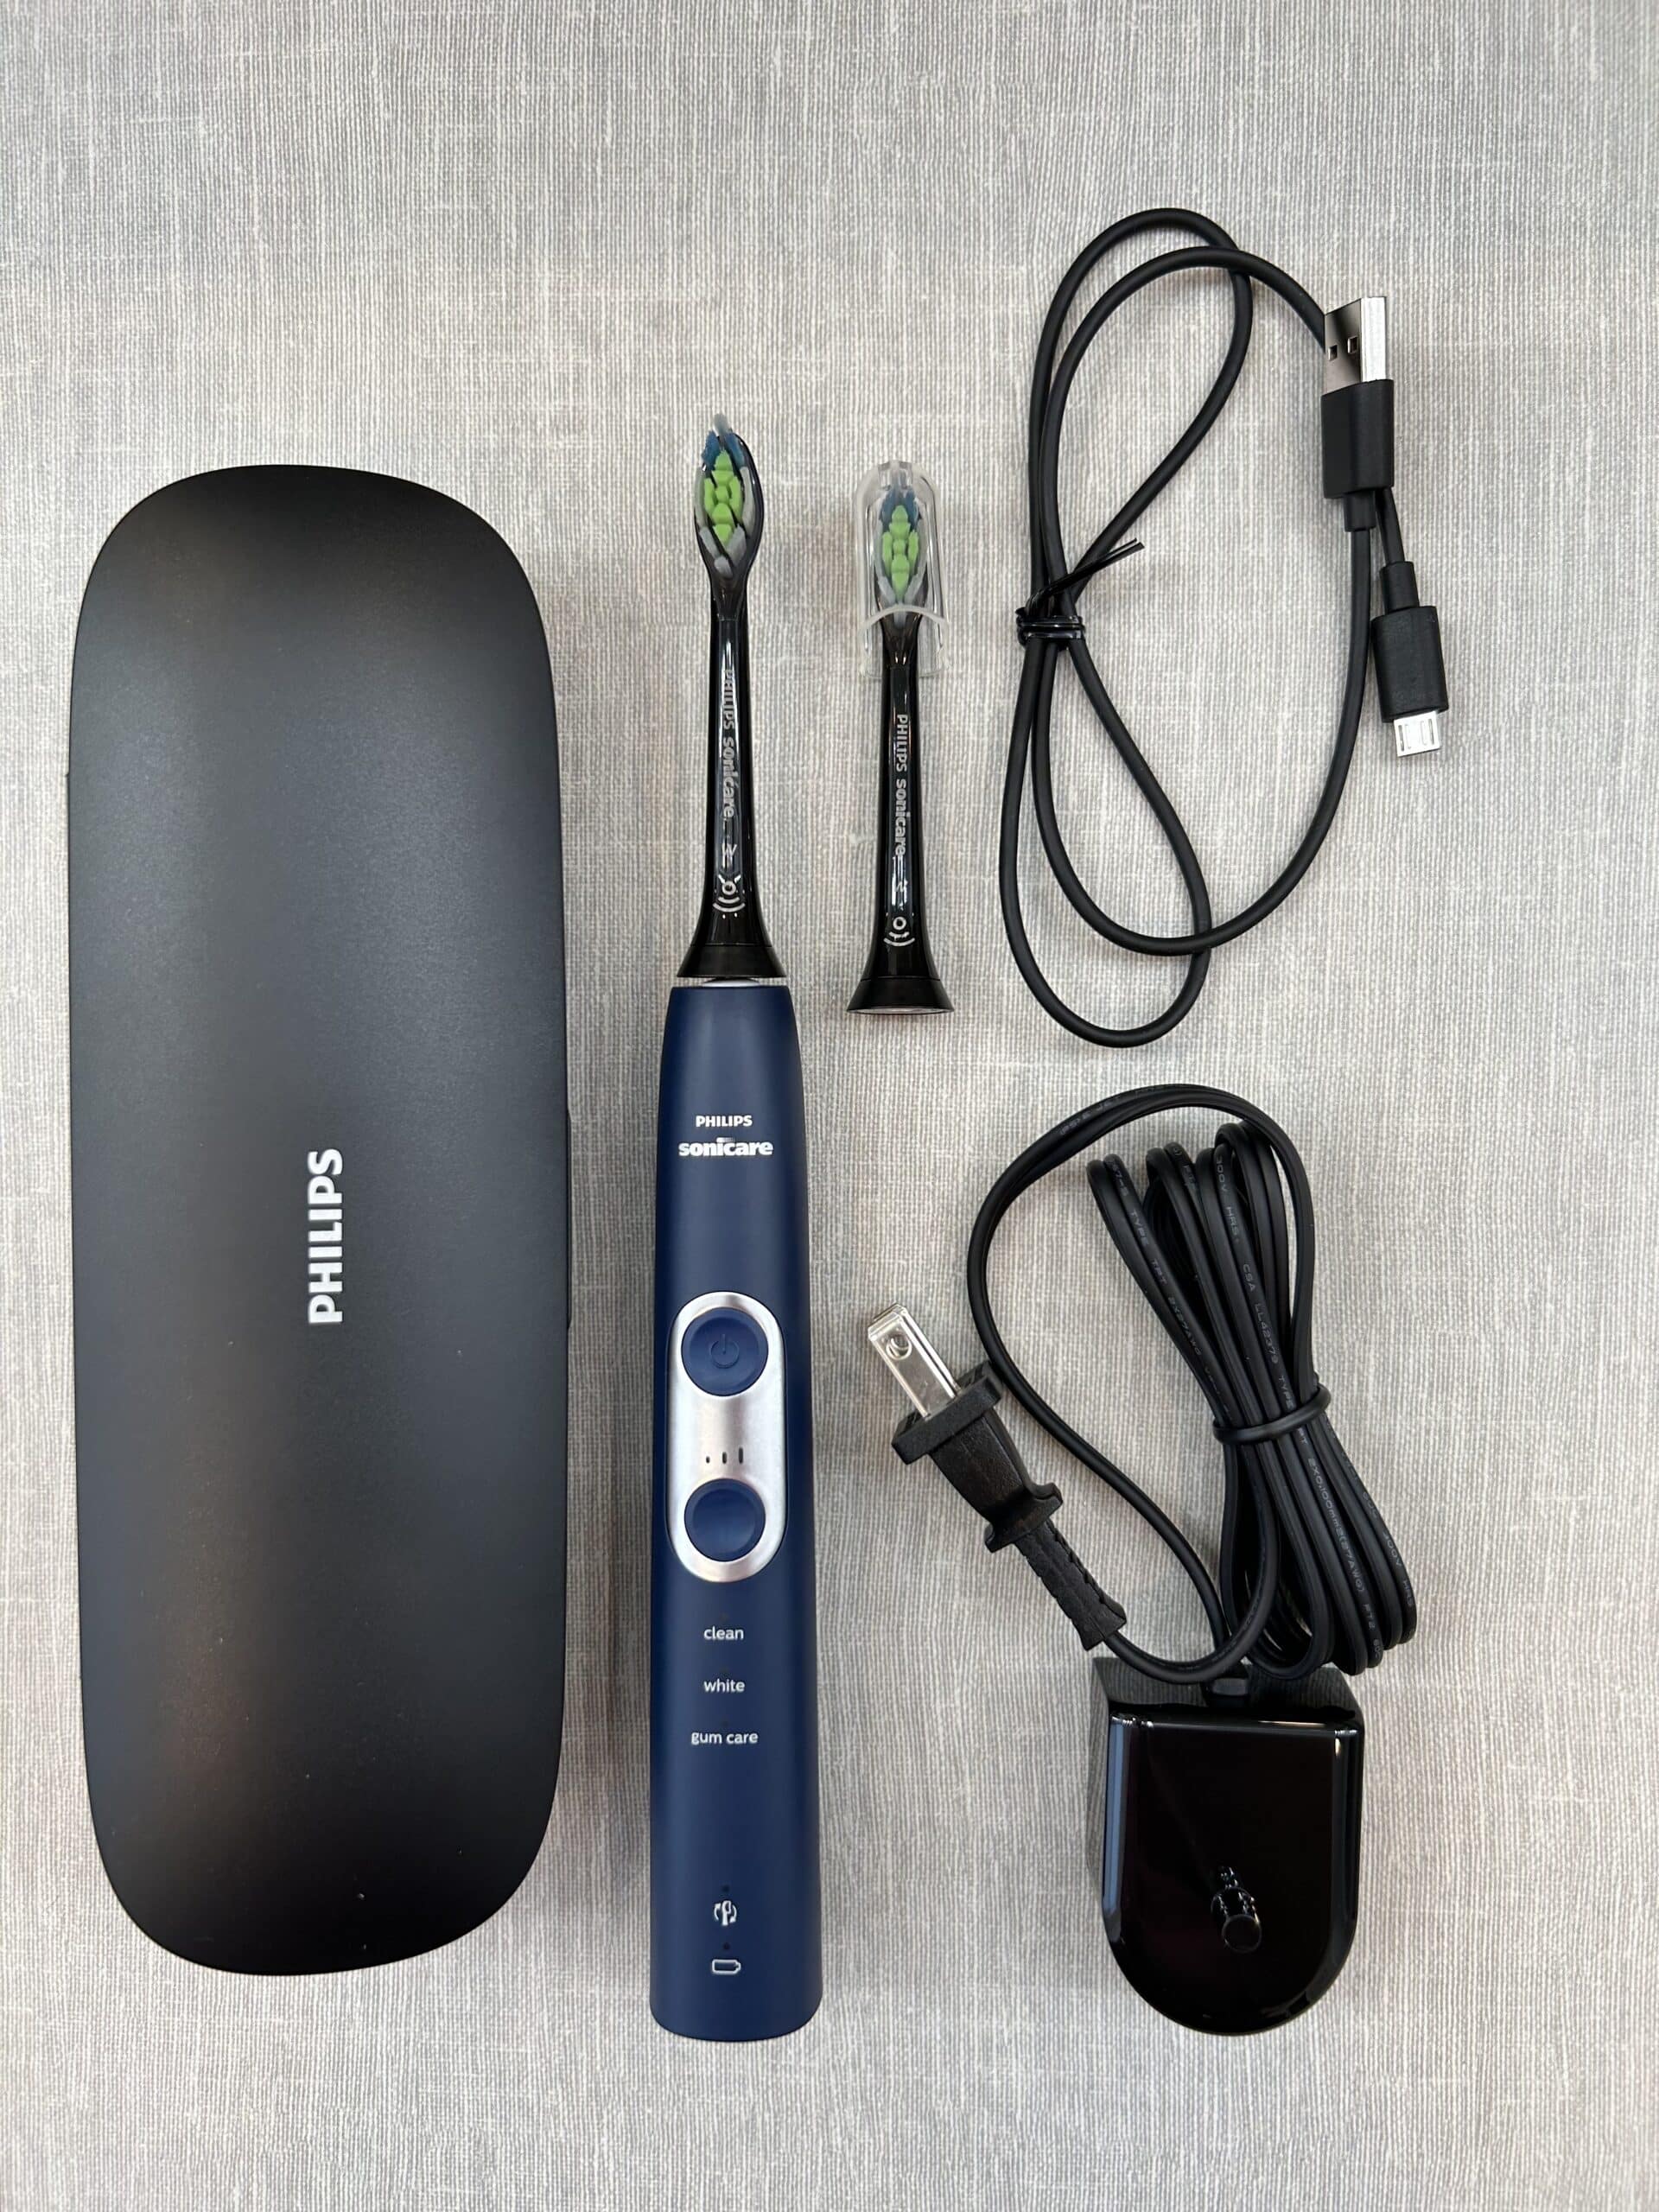 Philips Sonicare 6500 Electric Toothbrush Review | My Dental Advocate